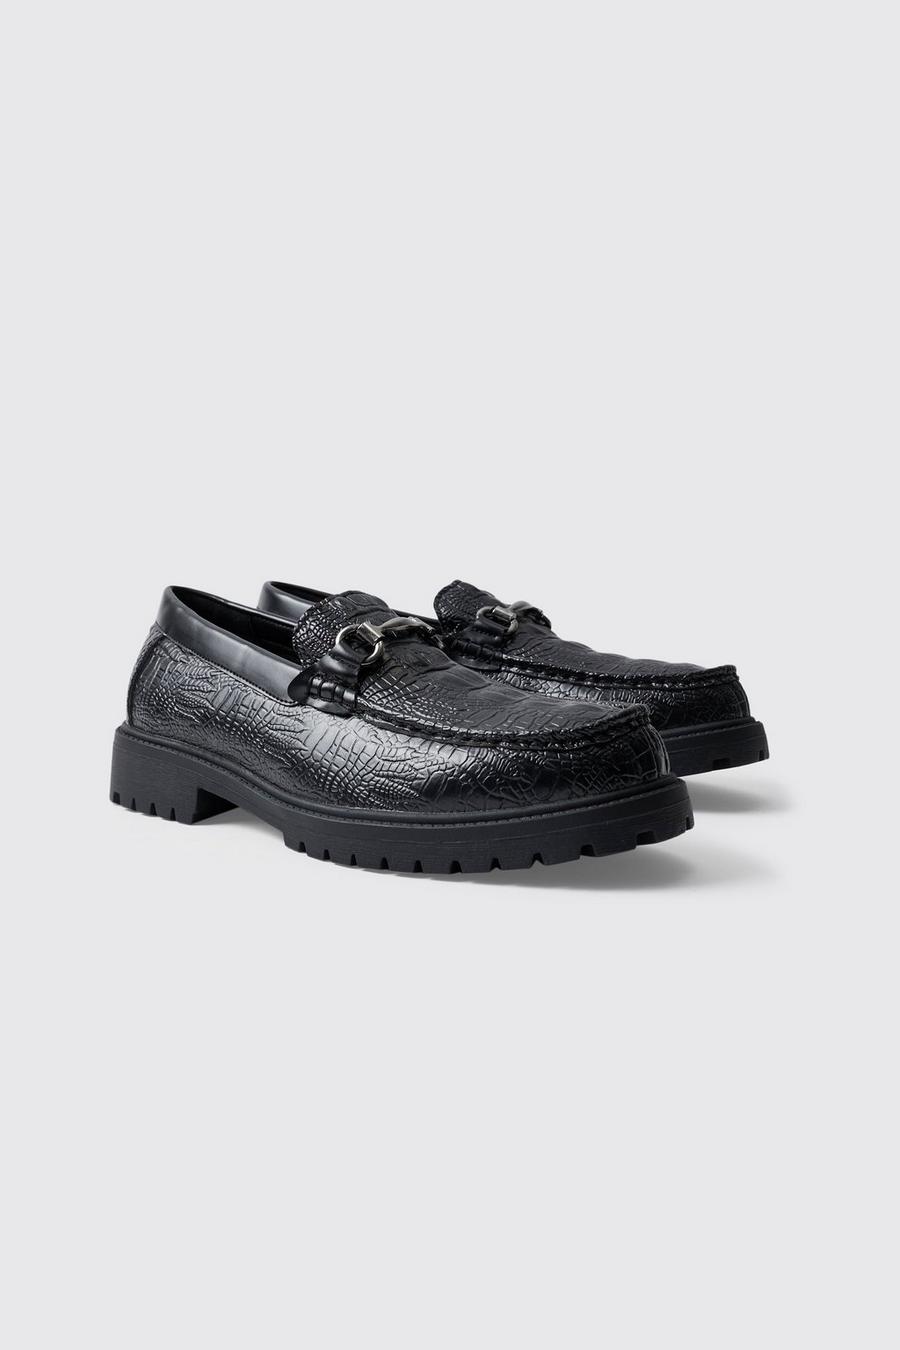 Black noir Croc Loafer With Tread Sole